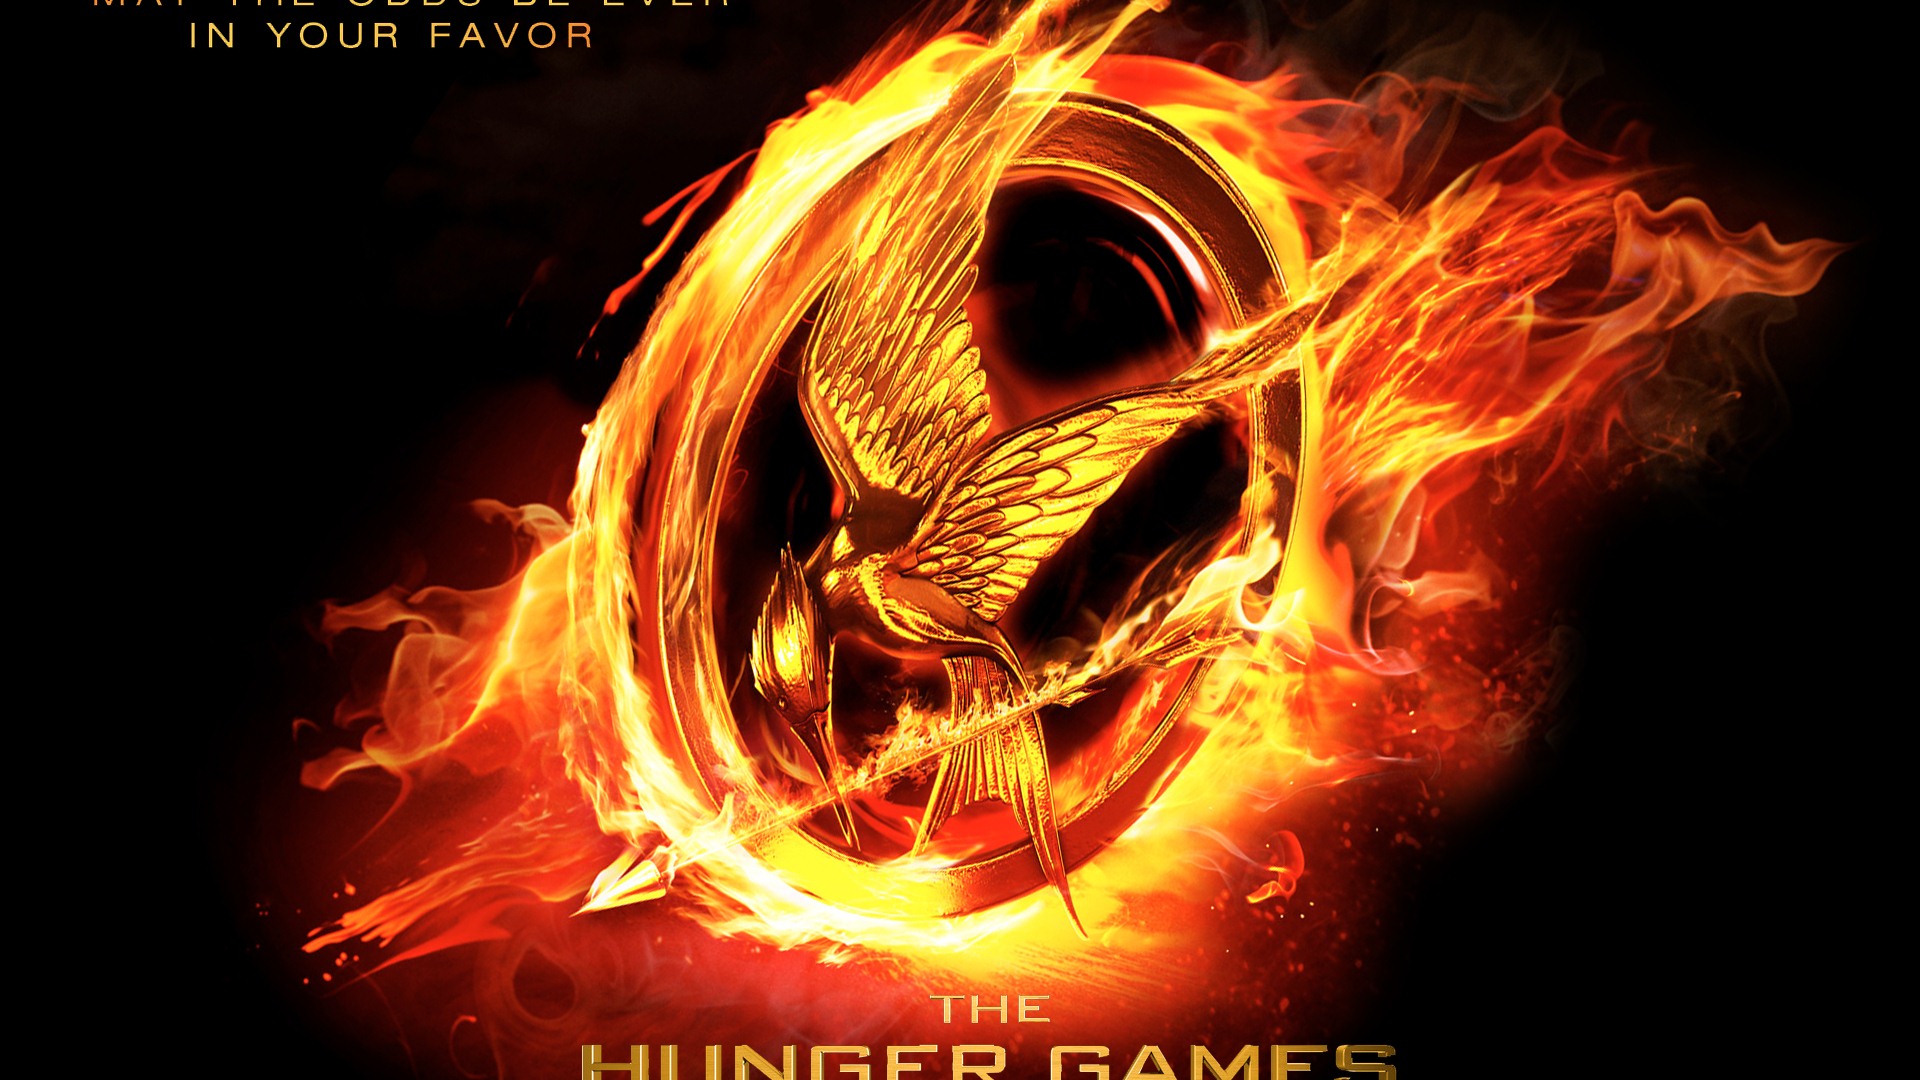 The Hunger Games HD wallpapers #13 - 1920x1080